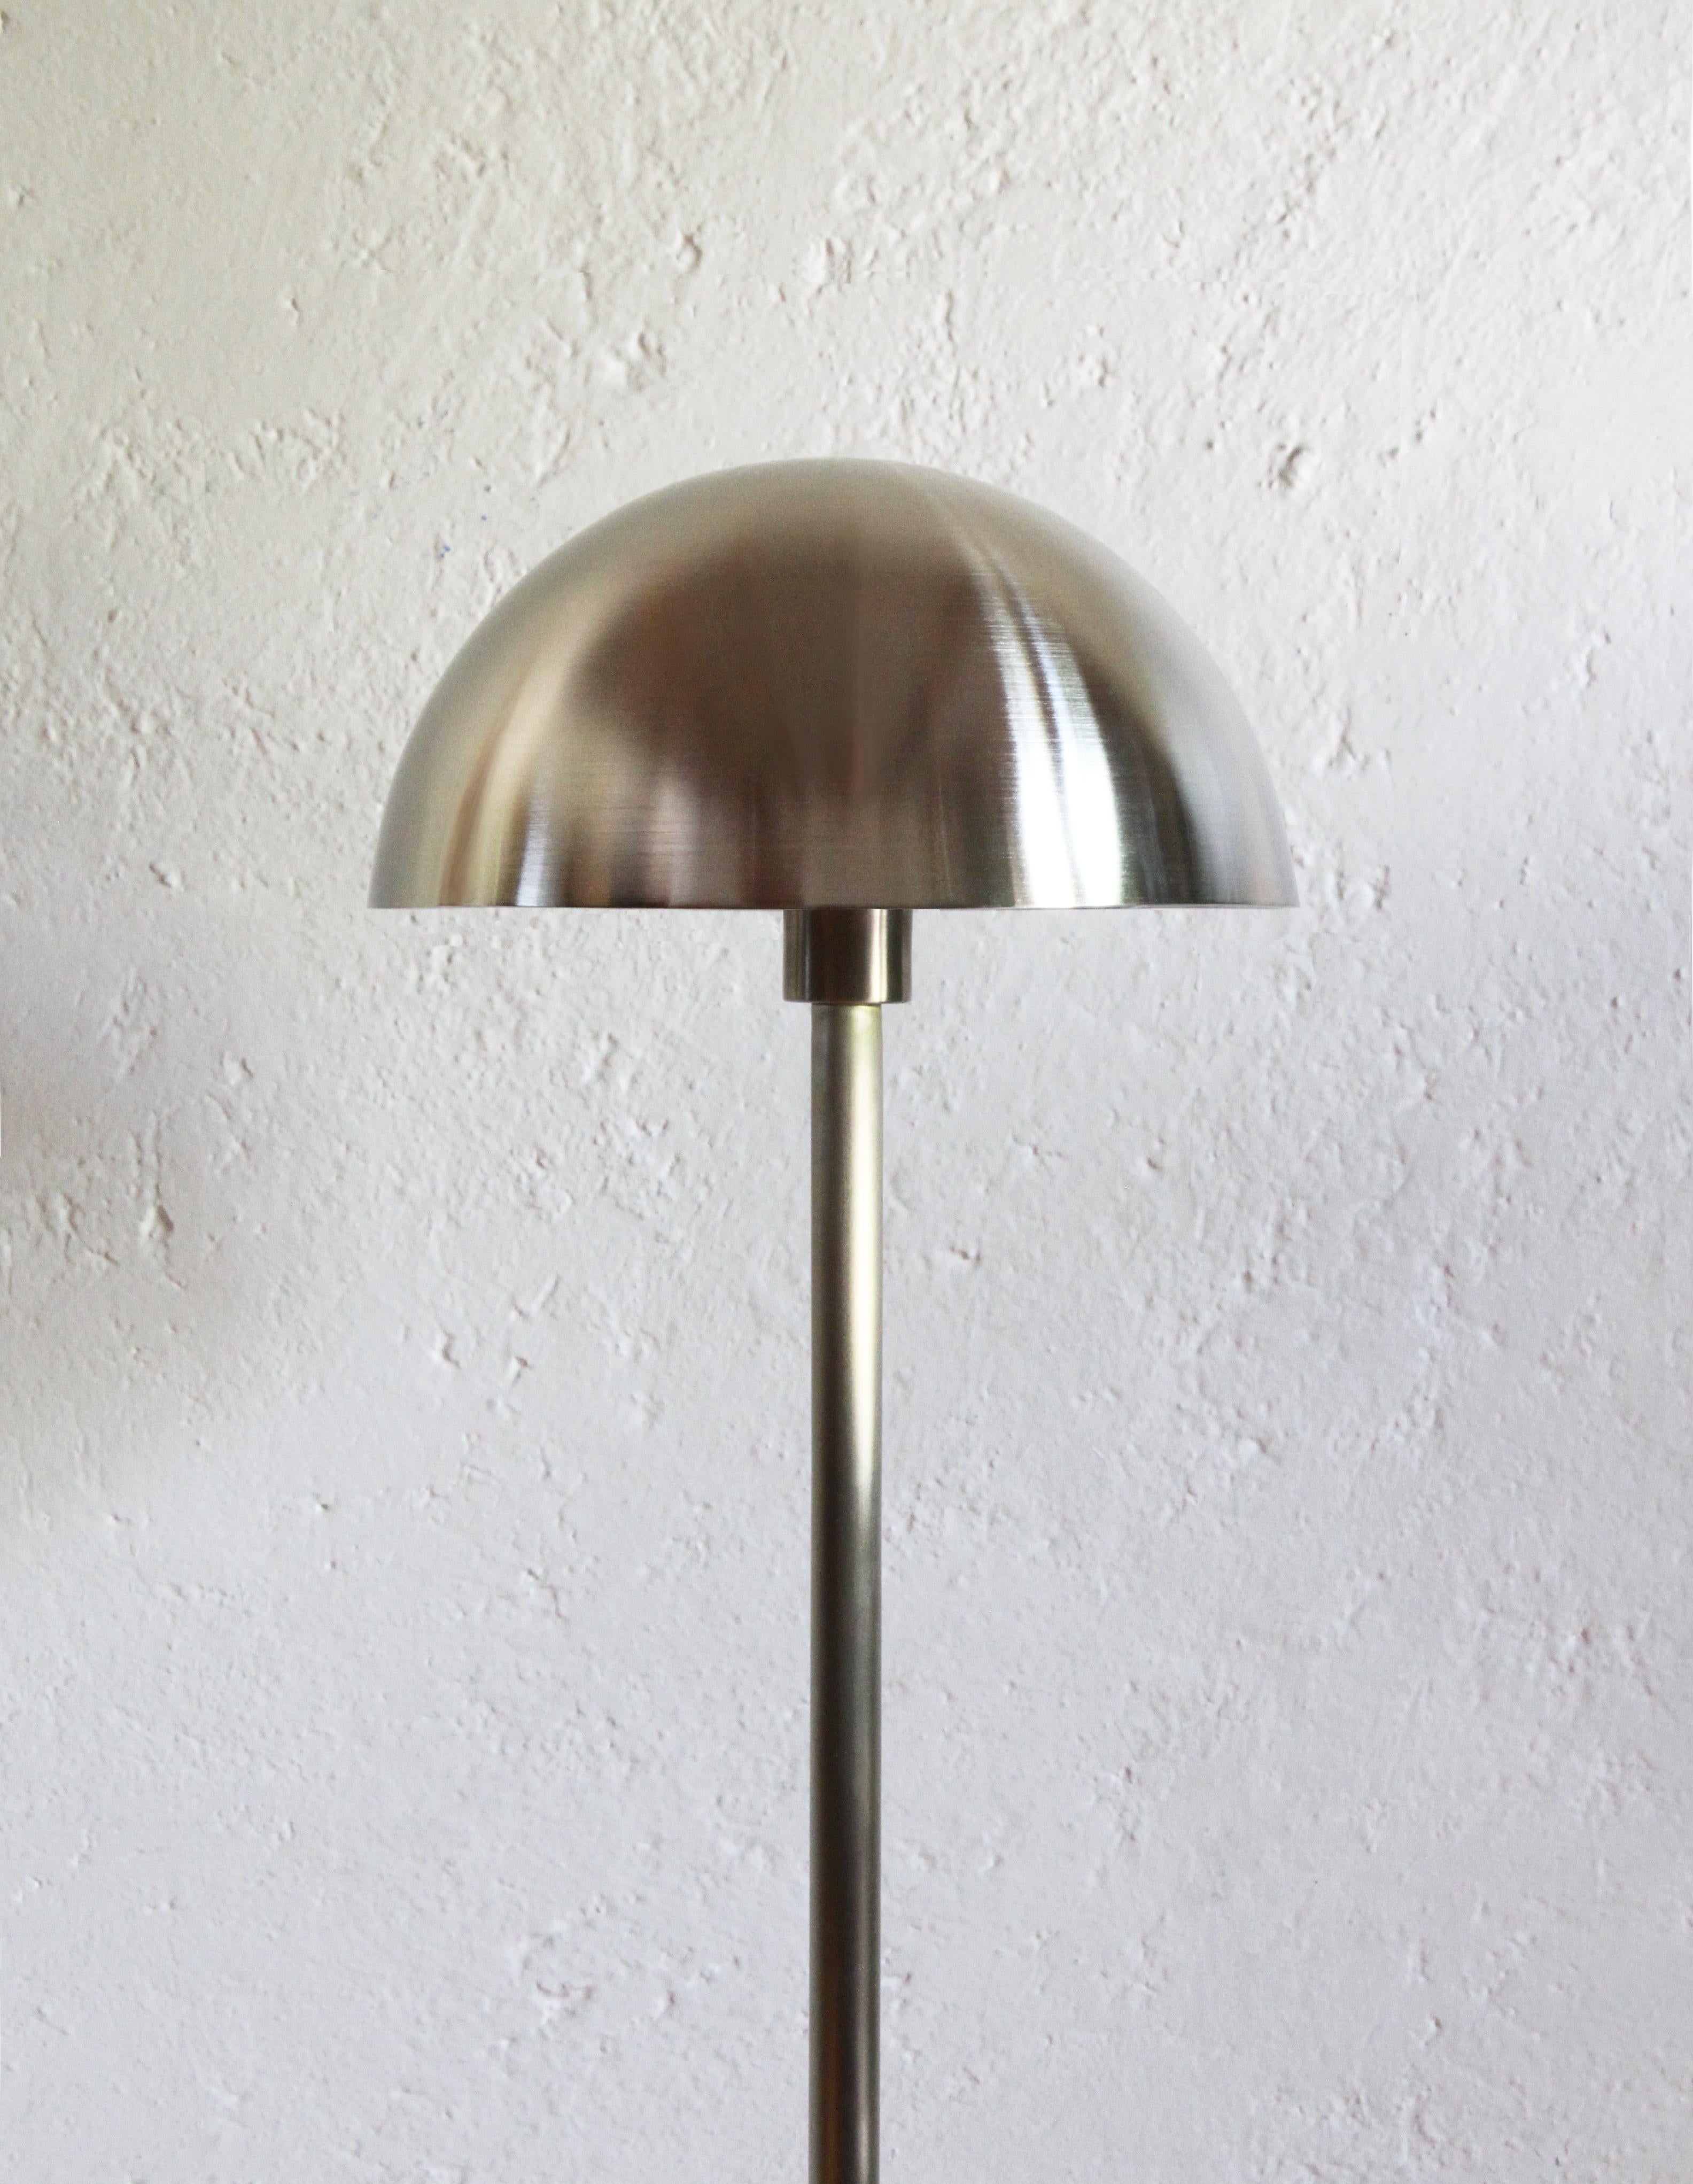 Terrazzo De Pie Abajo is a dimmable floor lamp with dimmer in cable. The solid steel structure is covered in electrostatic metal finish. The base of this lamp is designed with internal steel counterweight, made from terrazzo.

The dome of this